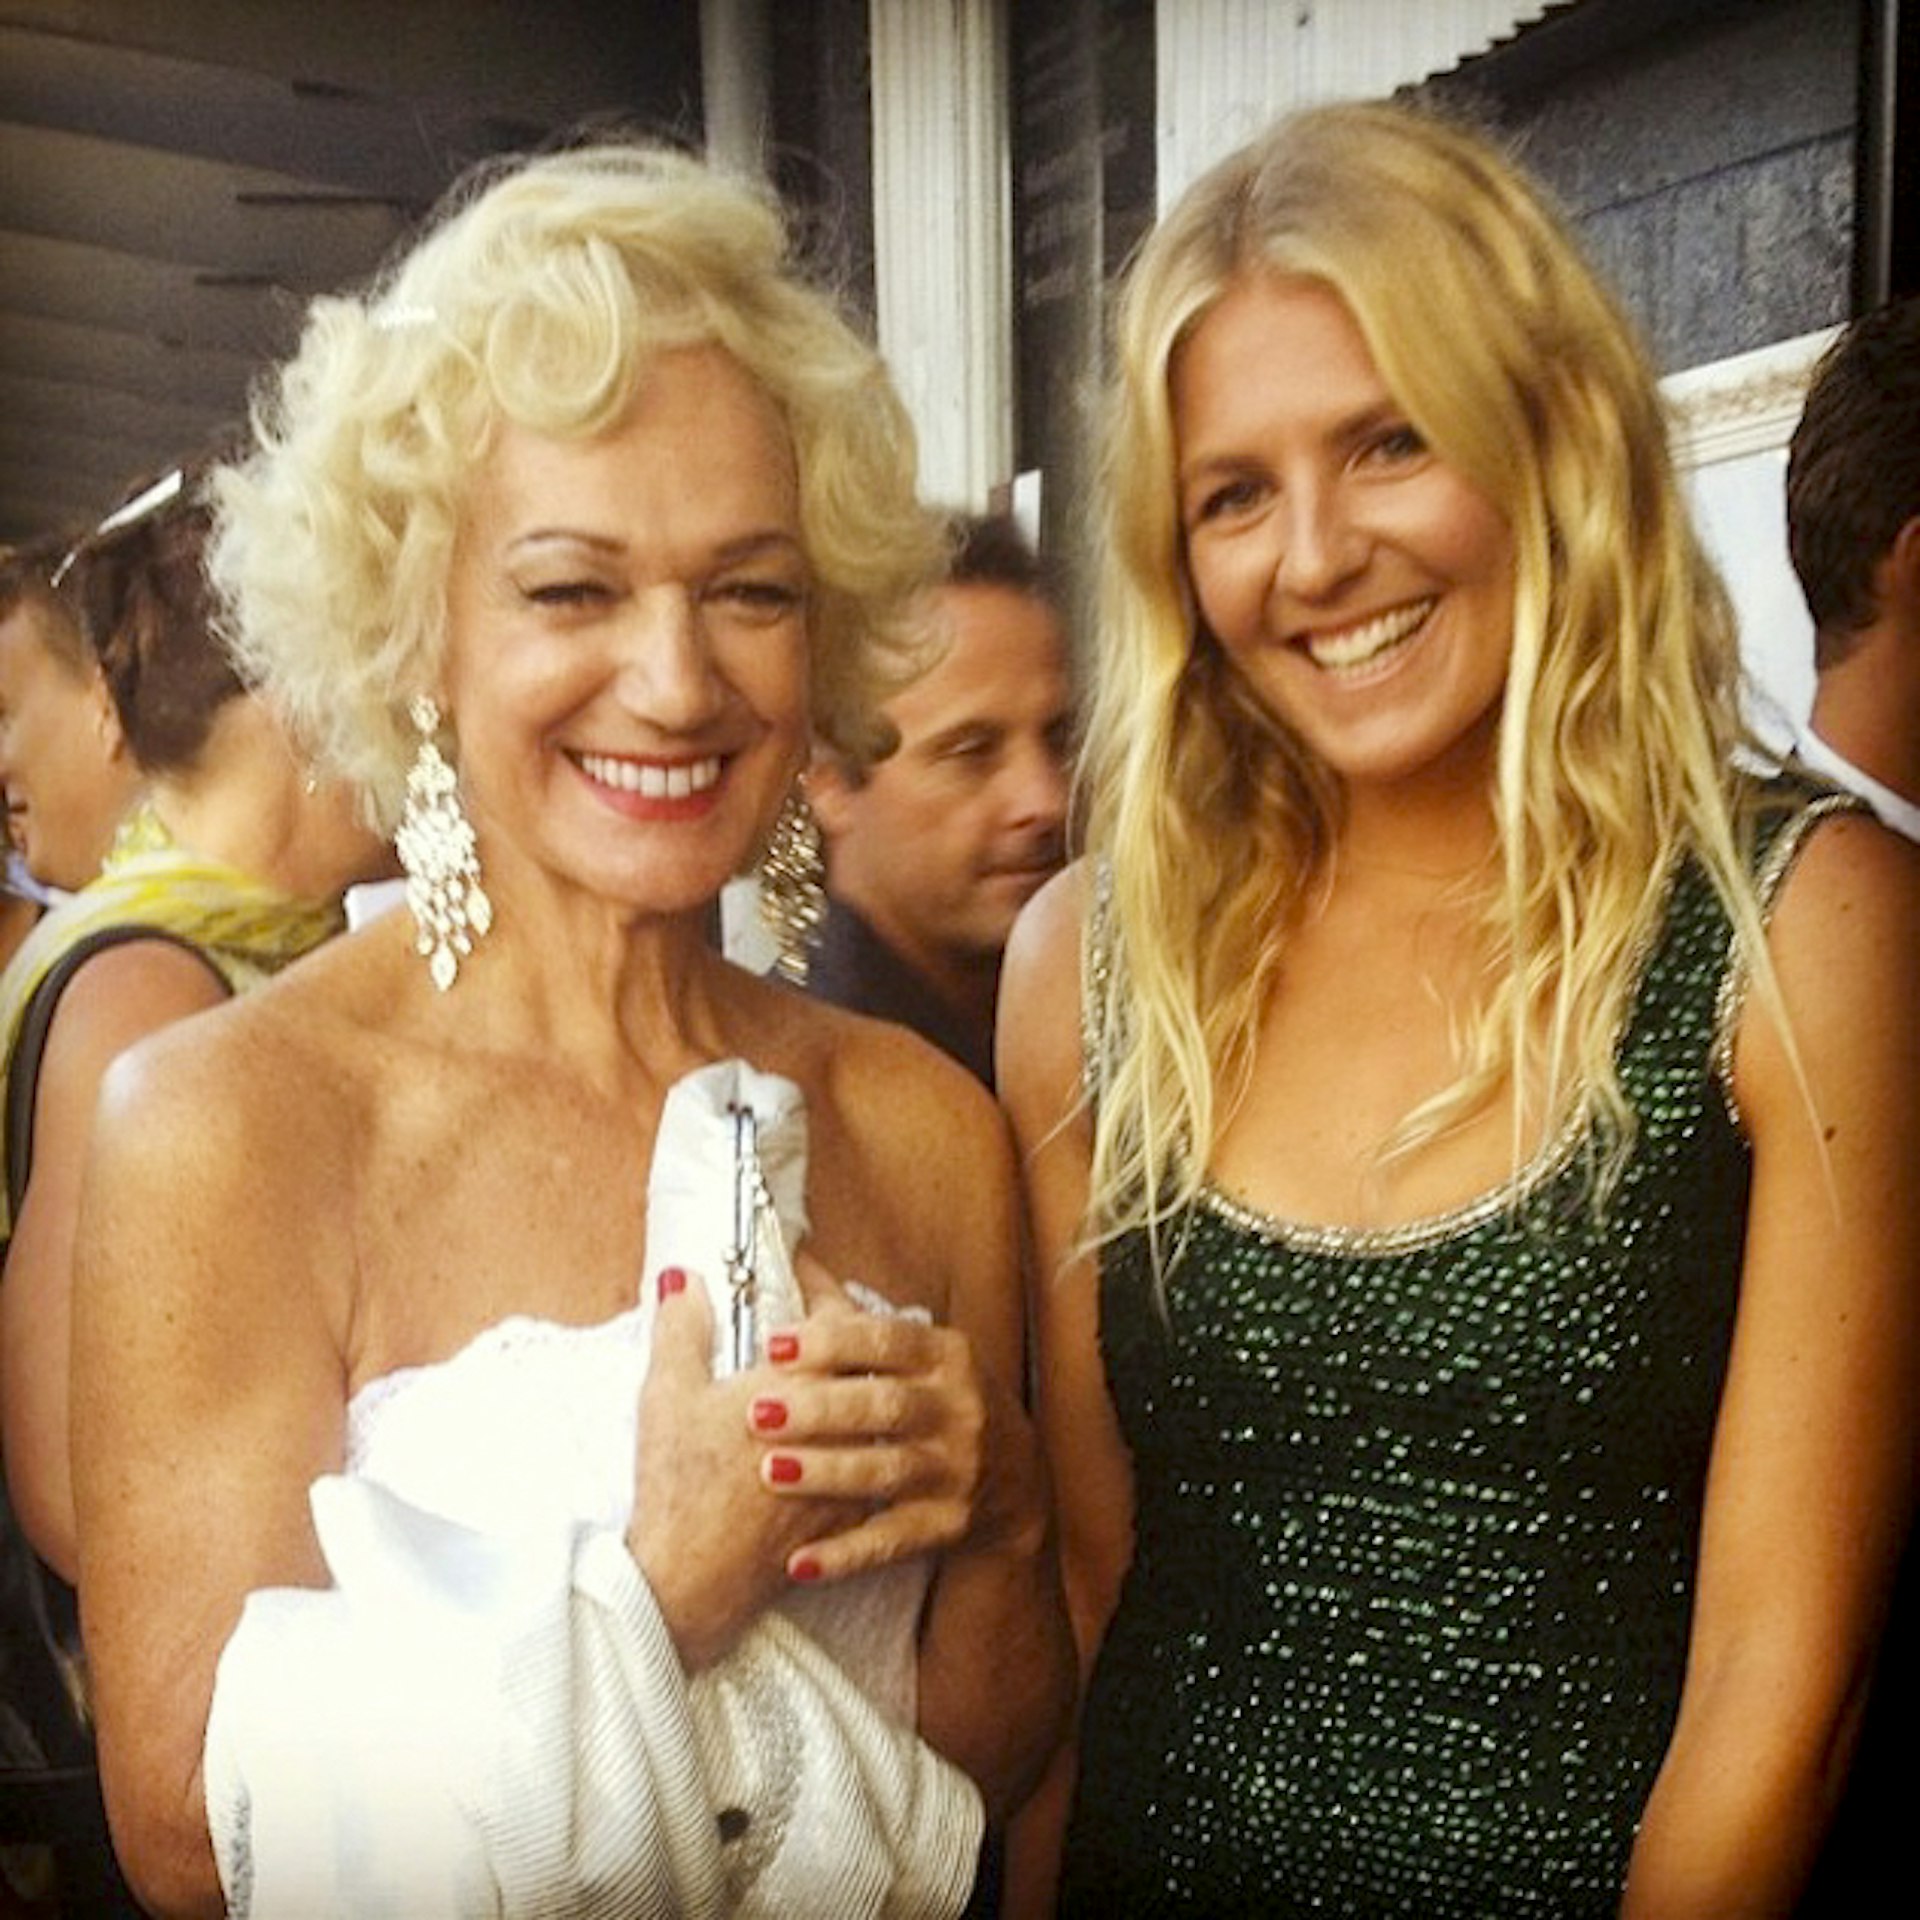 Steph Gilmore and Westerly feb 20 2013